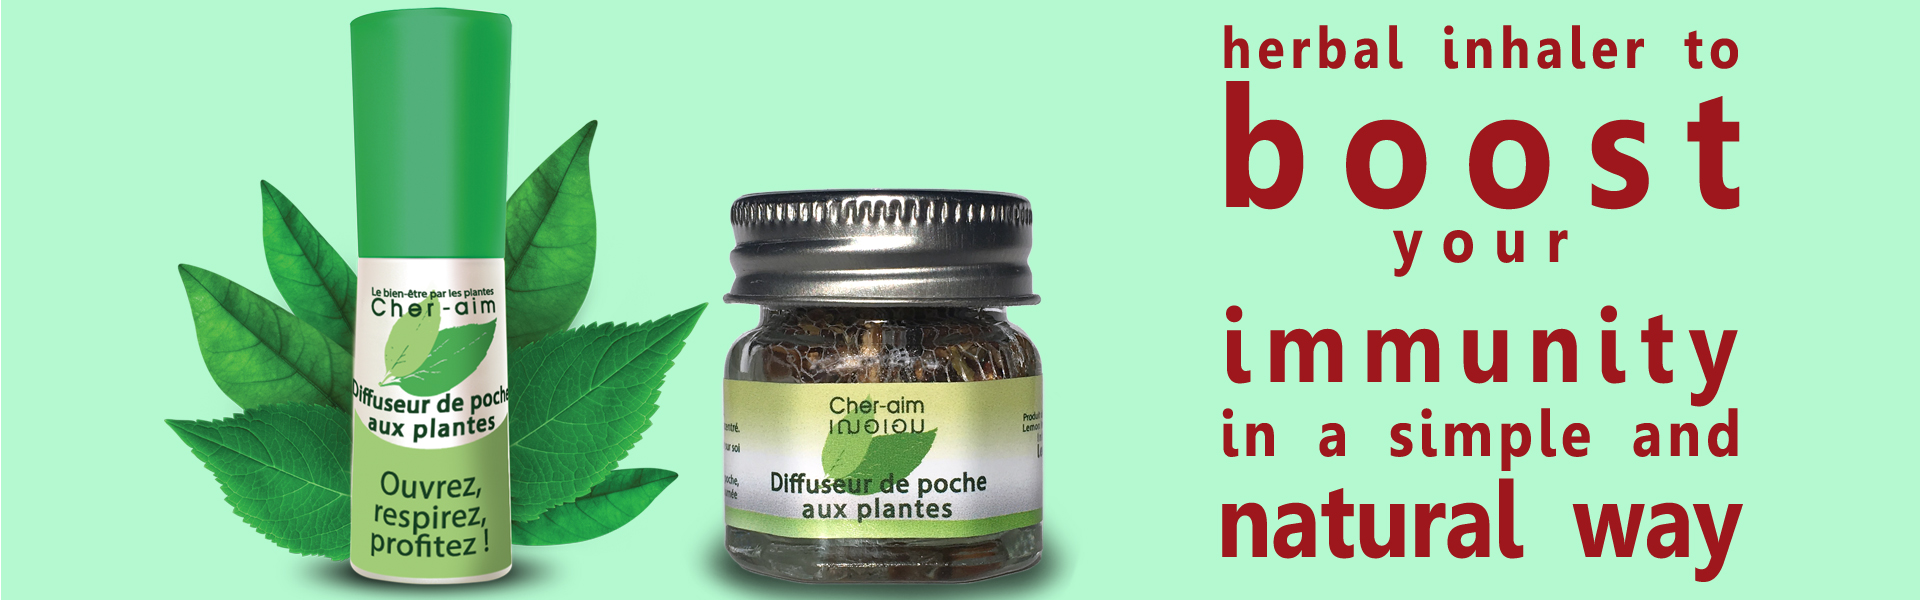 Our pocket herbal inhaler : a handy accessory to boost your immunity in a simple & natural way.